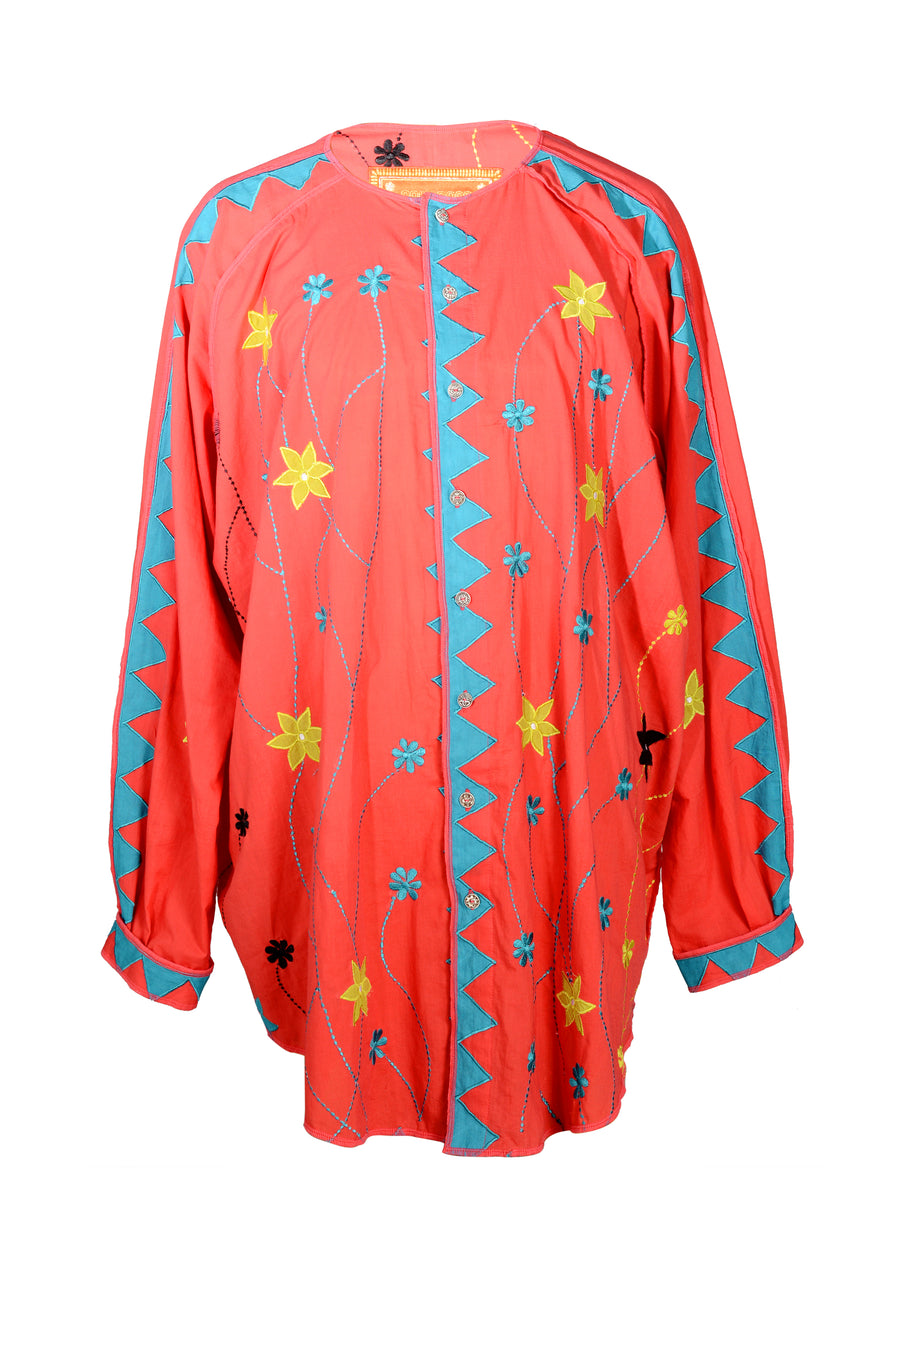 Lany - Cotton Voile Applique Long Sleeves Shirt (7342051033284)